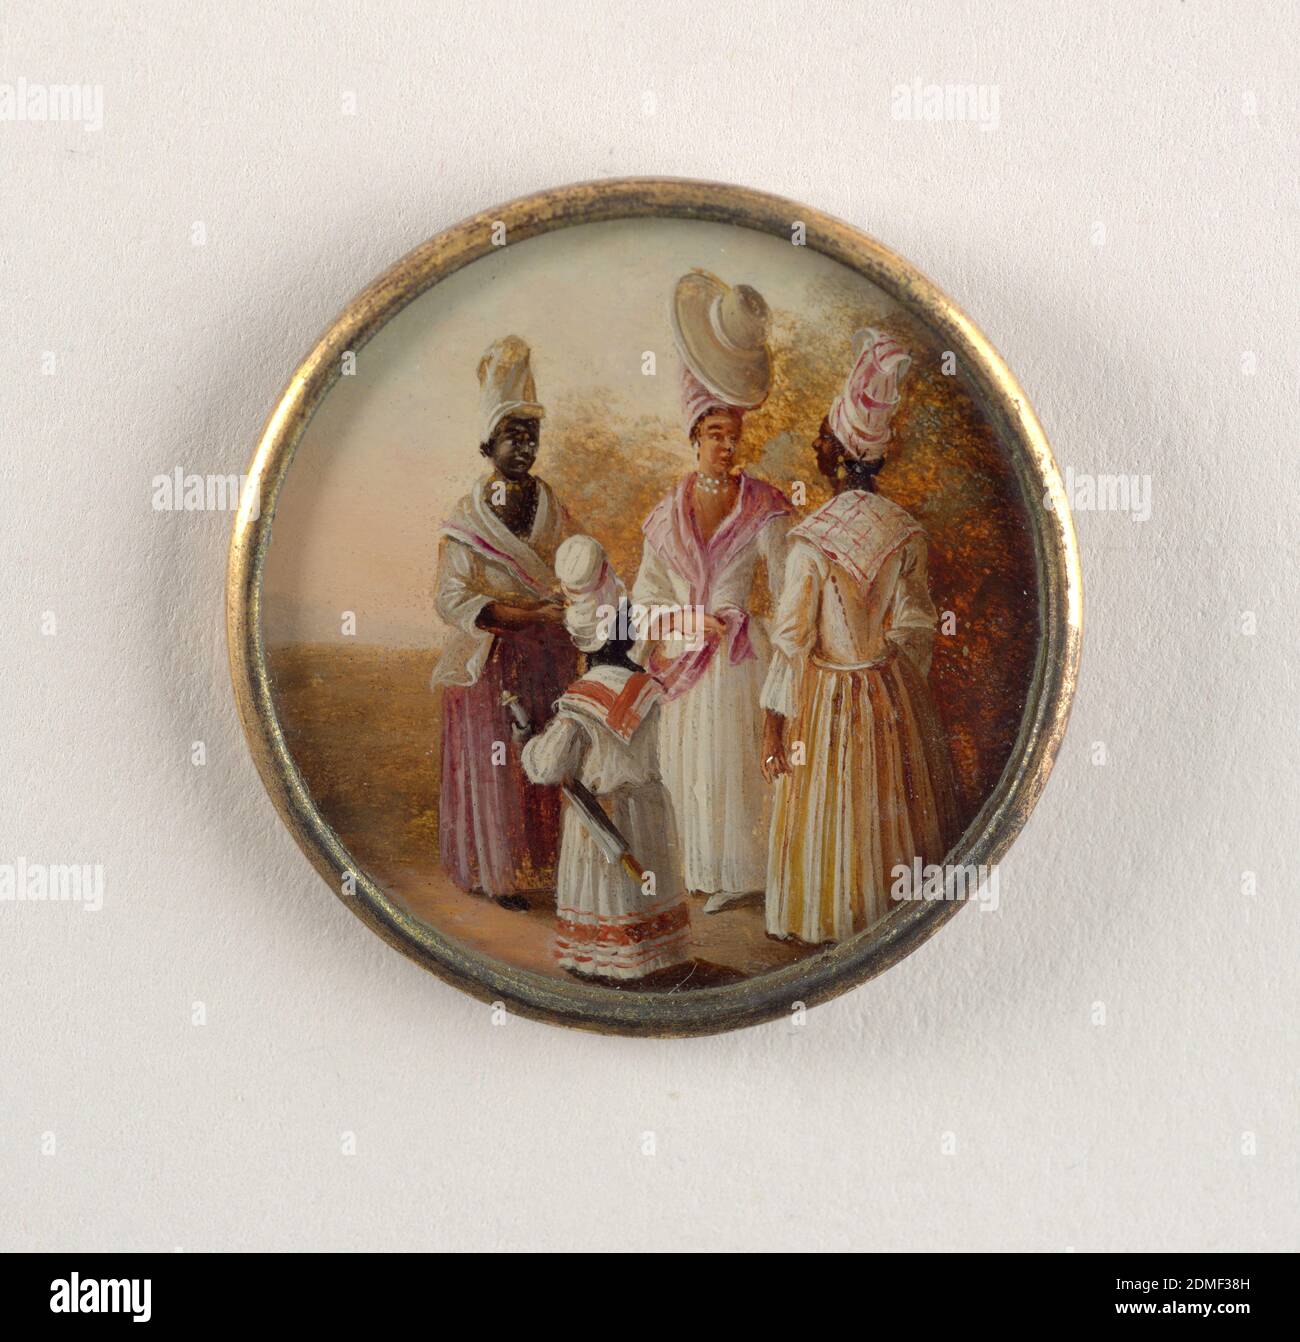 Button, Gouache paint on tin verre fixé, ivory (backing), glass, gilt metal, Button depicting scene of four figures in a landscape. Three women and a child wearing dresses. At center a light-skinned woman in jewelry and large turban topped with a sunhat., late 18th century, costume & accessories, Decorative Arts, Button Stock Photo